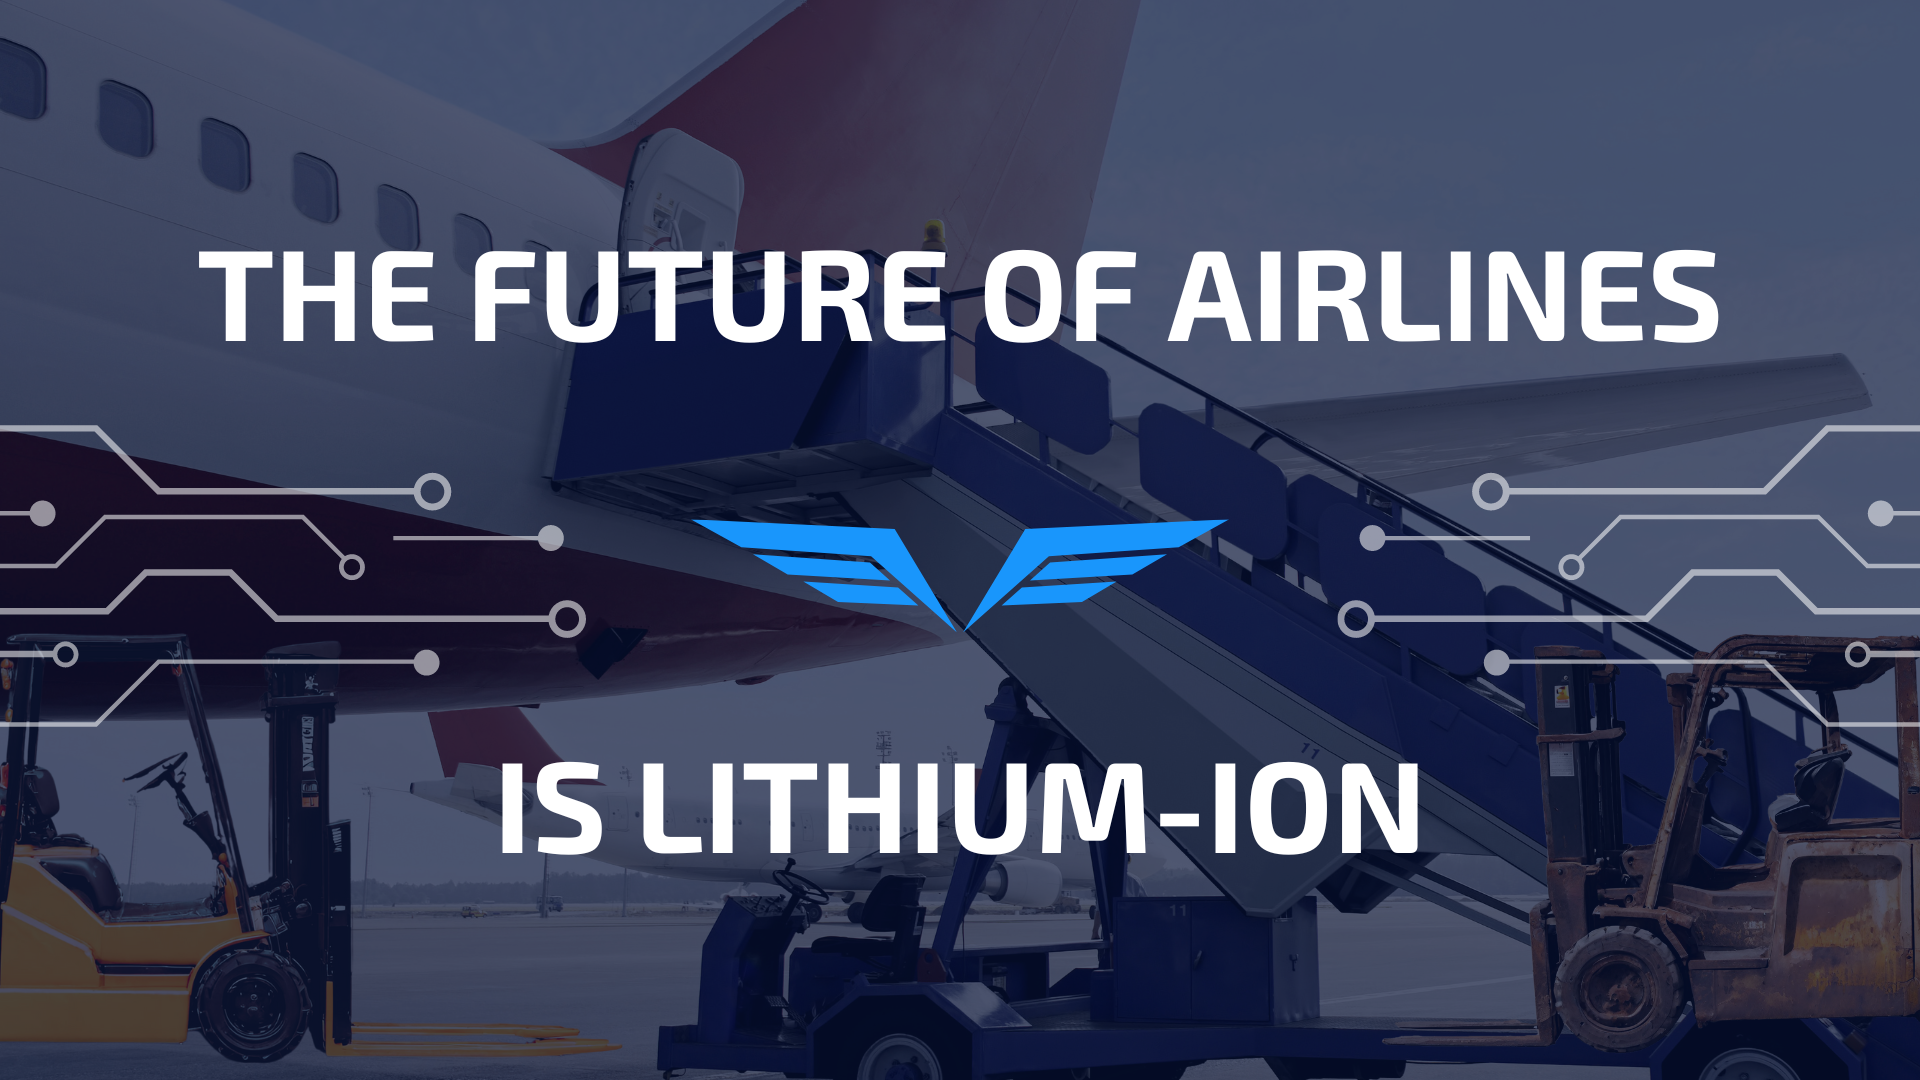 The Future of Airlines is Lithium-ion (Resource Visual) (1920 x 1080 px)